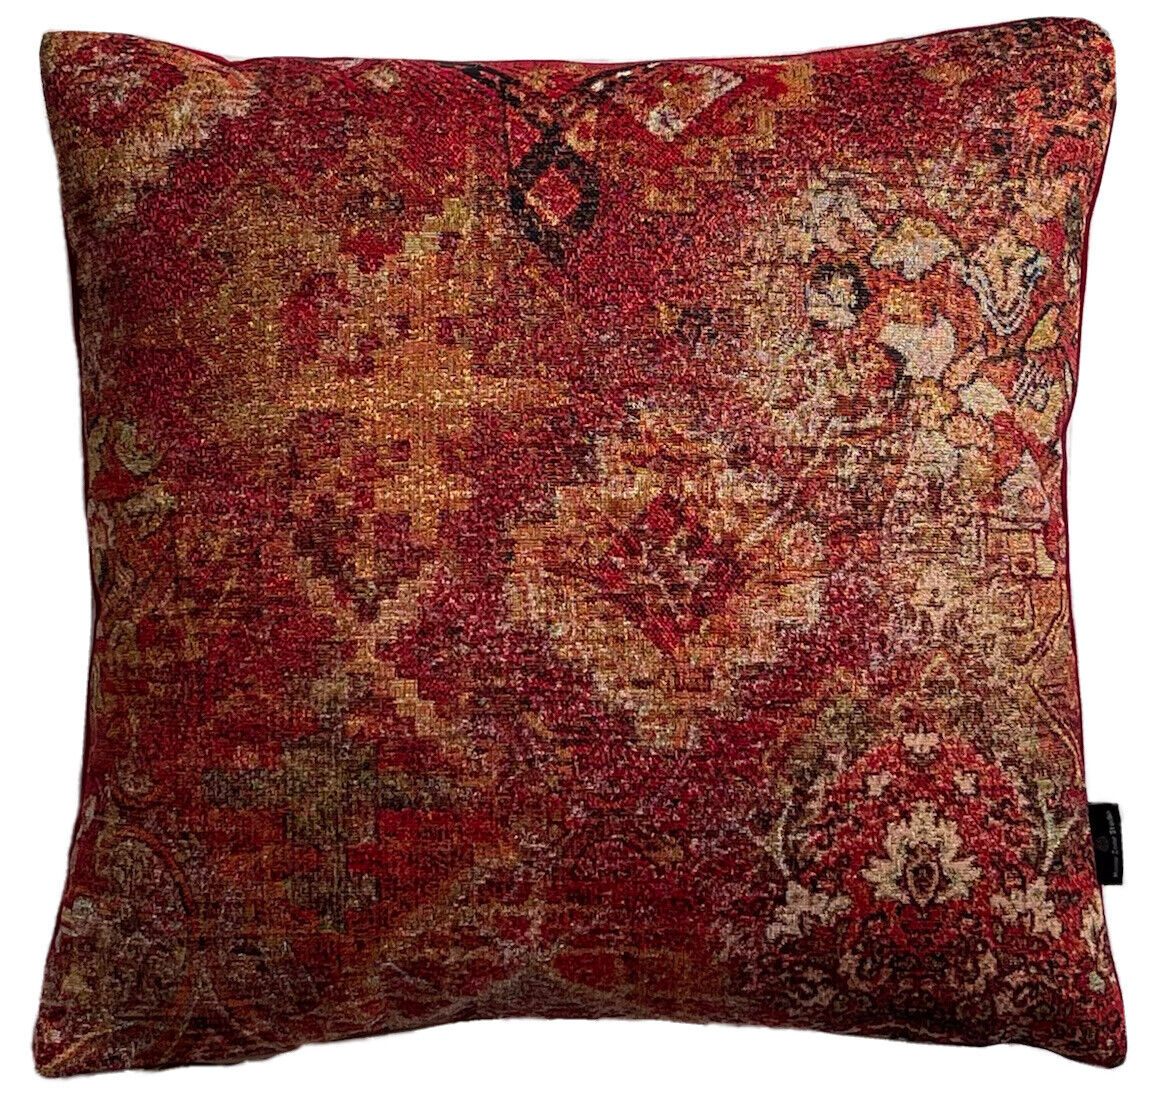 Rusty red and orange tapestry throw pillow cover